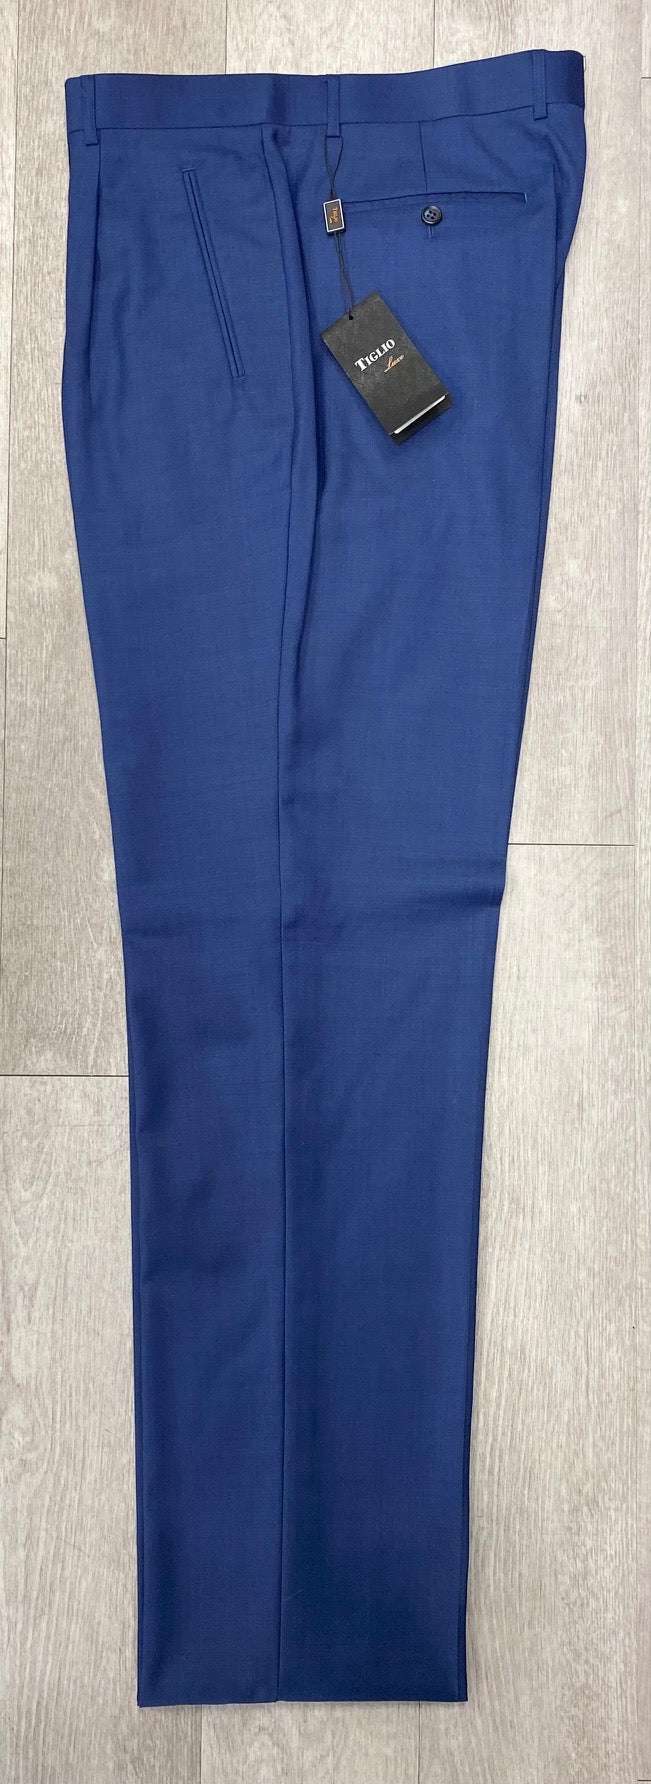 Tiglio Luxe 2521 Comfort Fit Single Pleated Pants 18+ Inch Leg TS4066/2 Blue